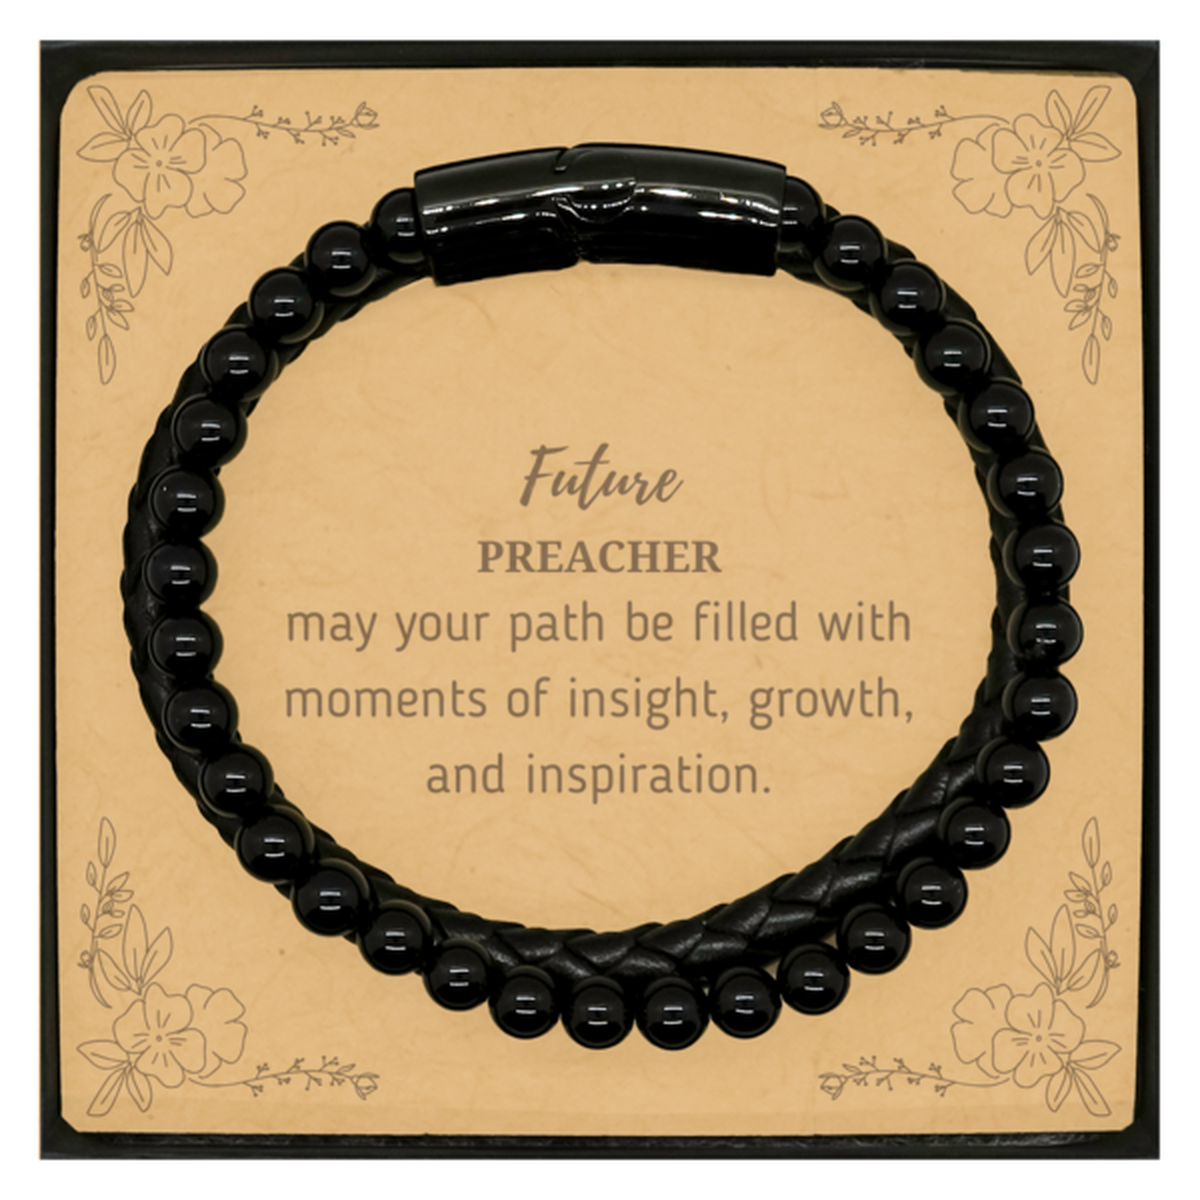 Future Preacher Gifts, May your path be filled with moments of insight, Graduation Gifts for New Preacher, Christmas Unique Stone Leather Bracelets For Men, Women, Friends